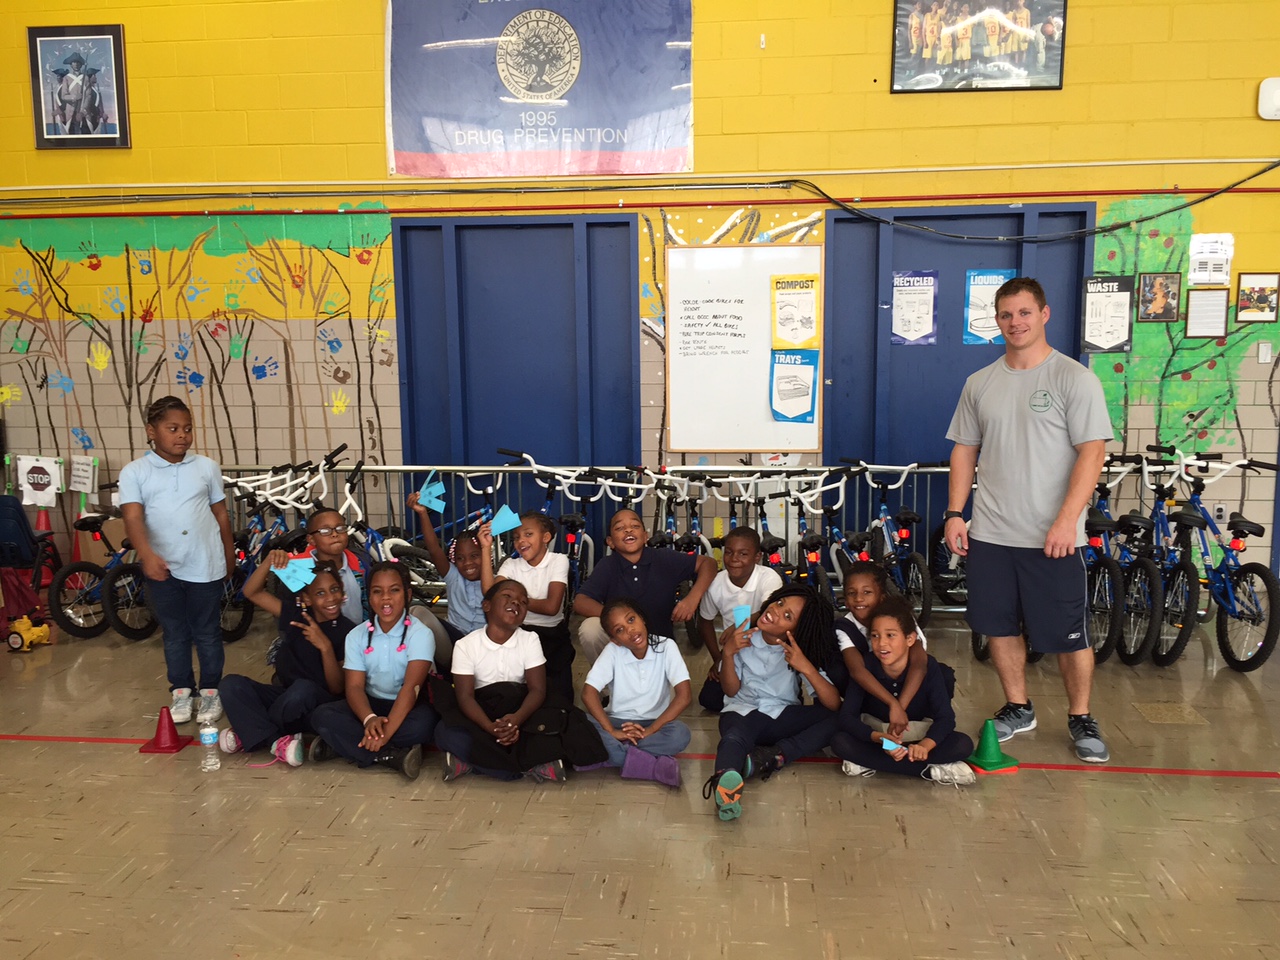 CW Harris Elementary School students pose for a picture with Mr. Richards, the P.E. teacher. (WTOP/Kate Ryan)